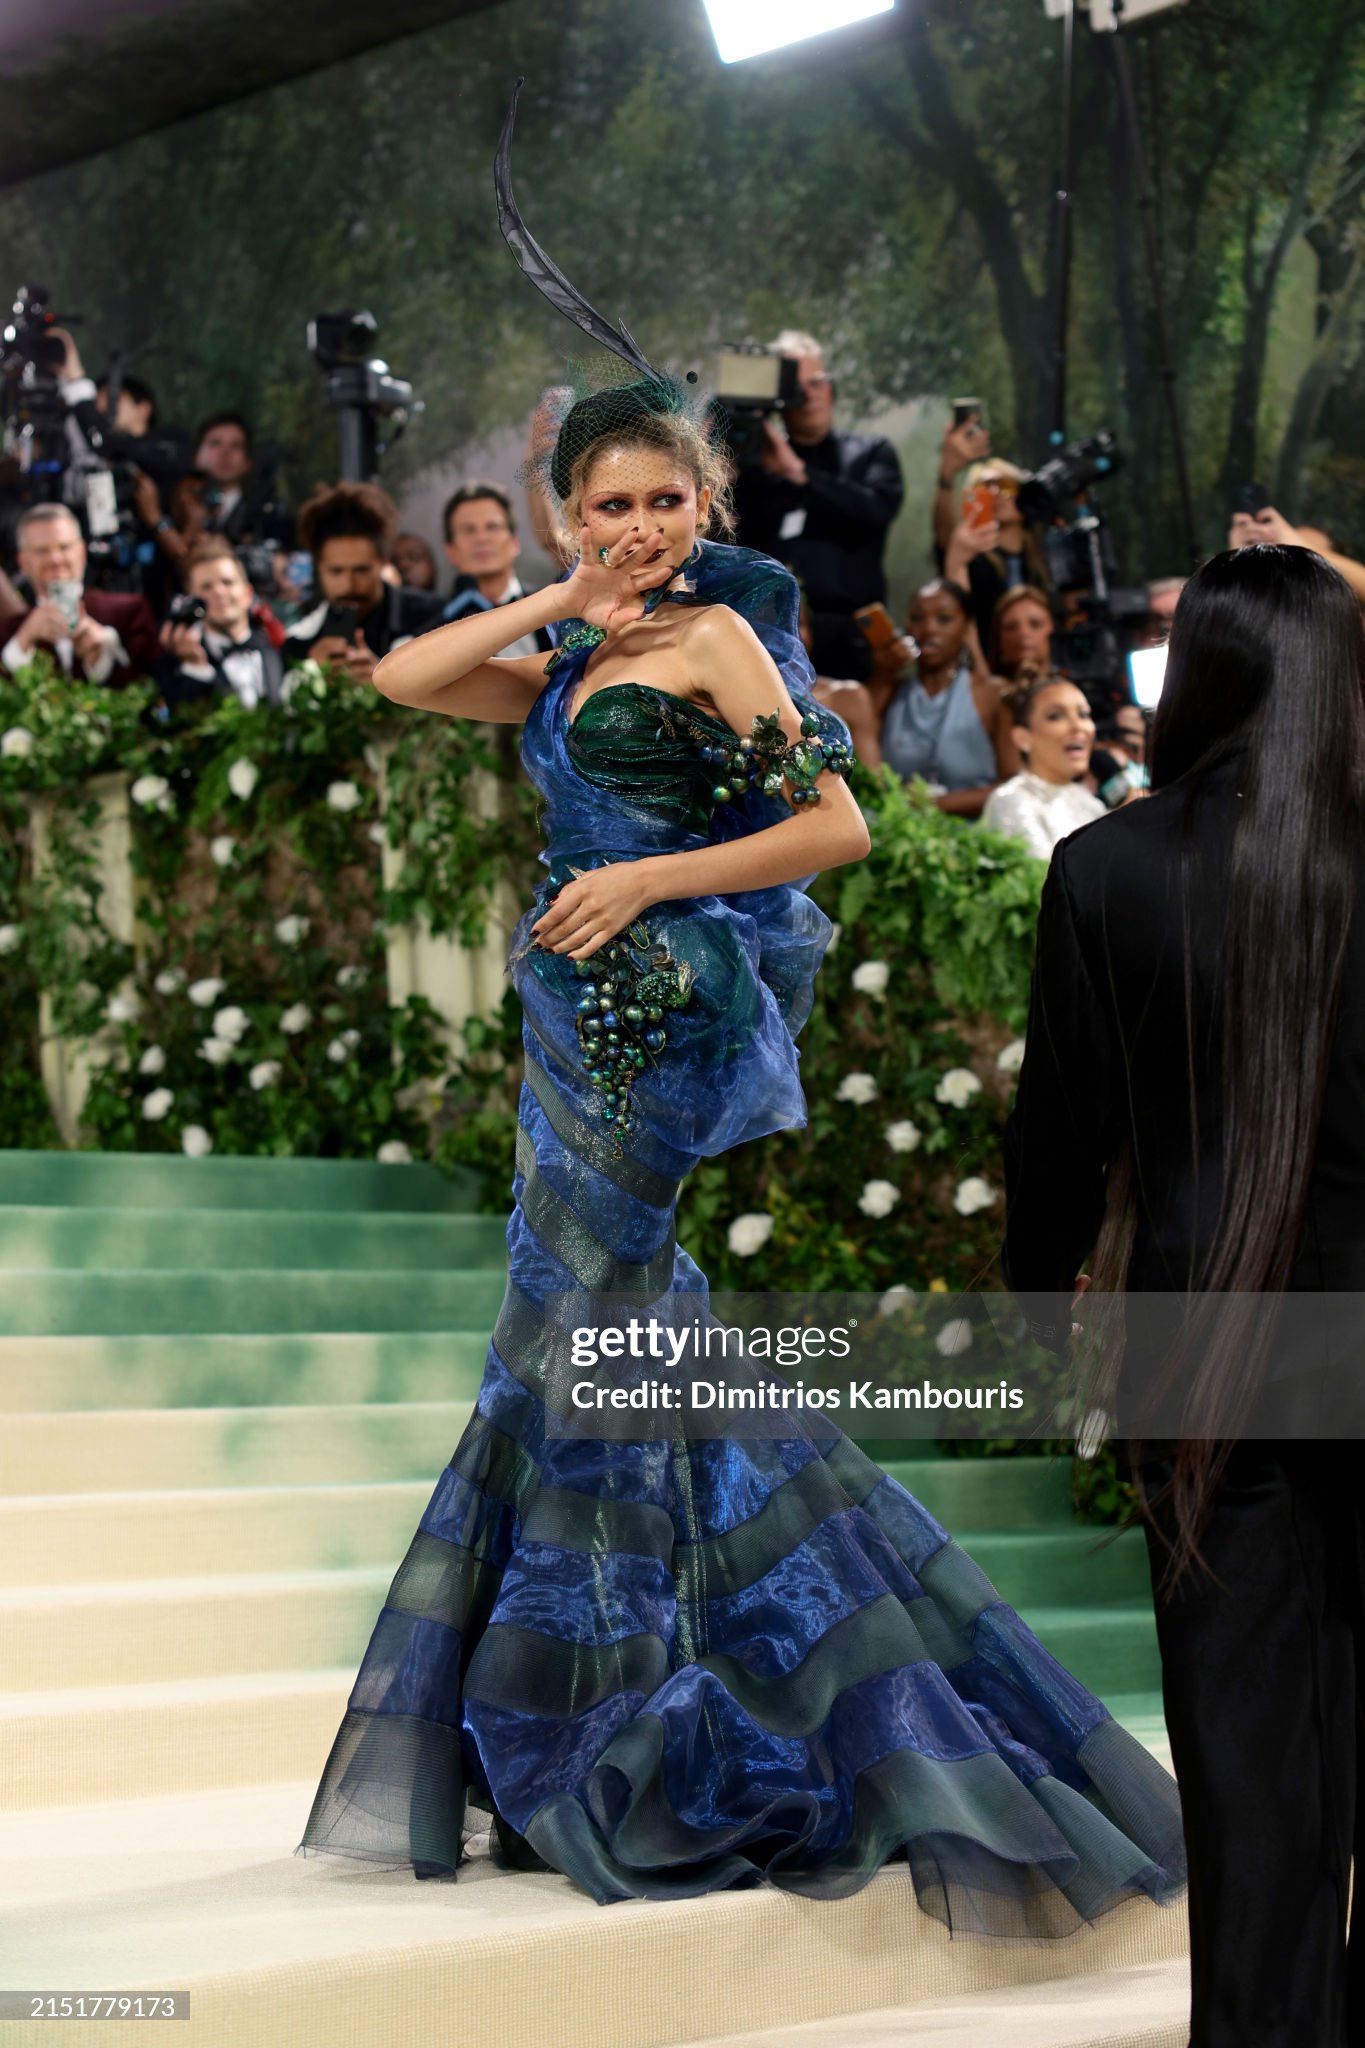 gettyimages-2151779173-2048x2048.jpg